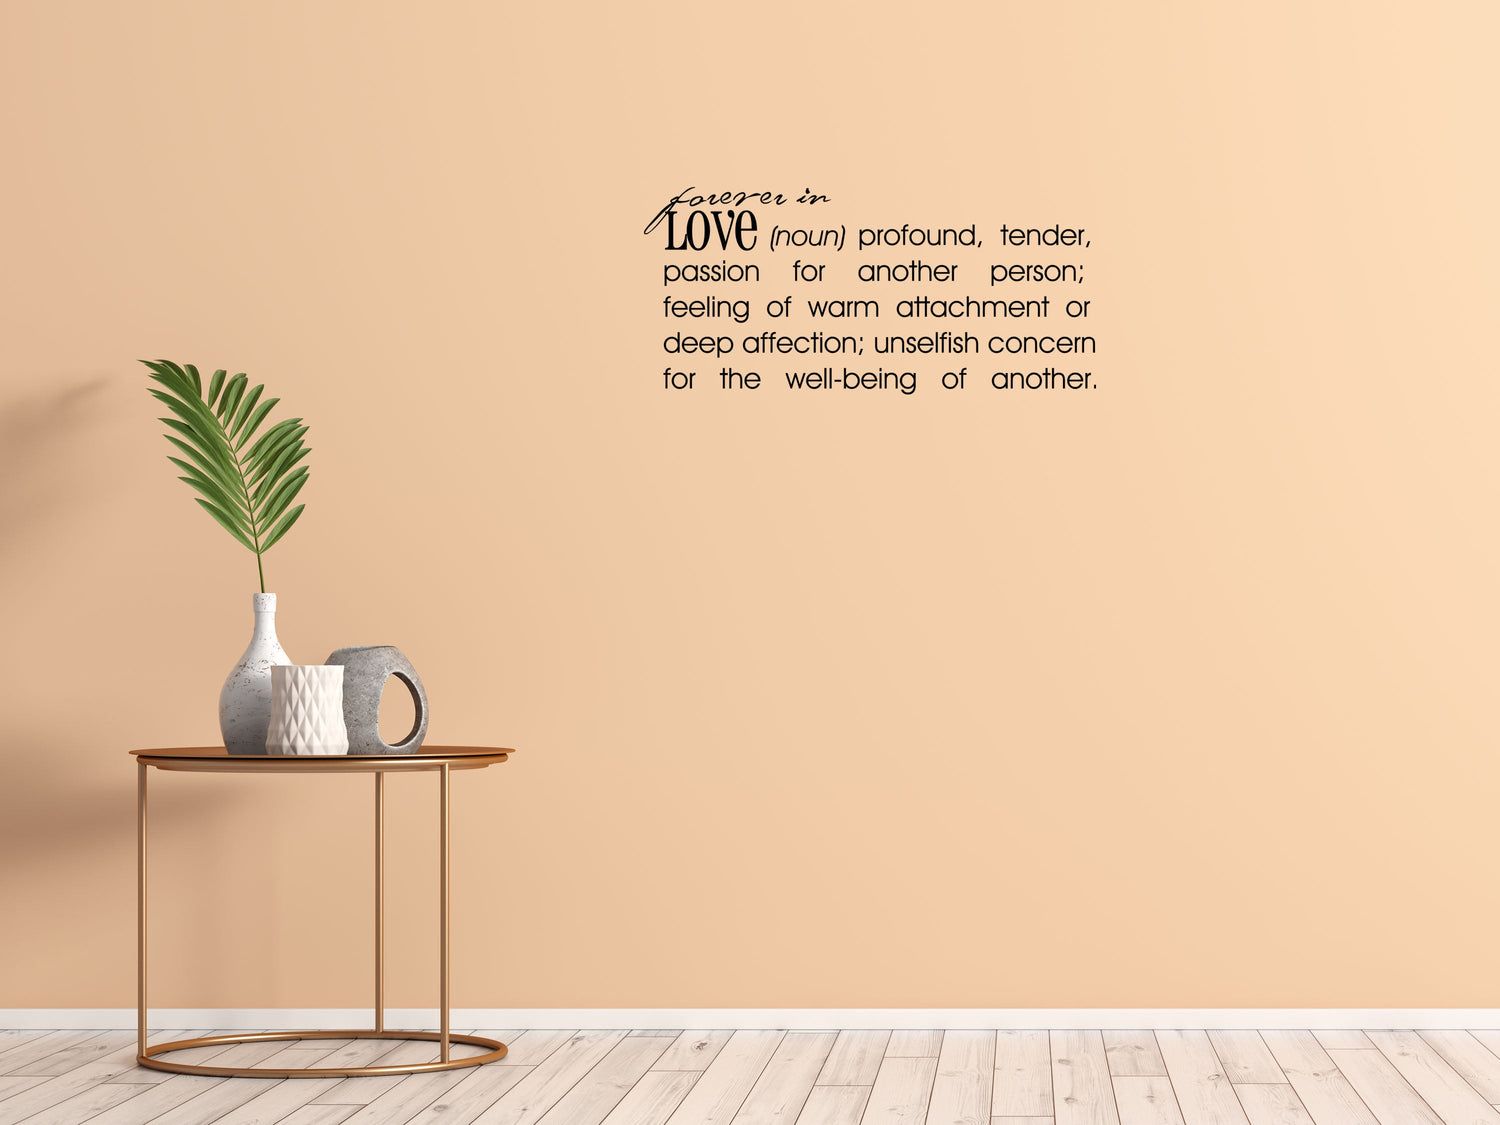 Forever In Love - Inspirational Wall Decals Vinyl Wall Decal Inspirational Wall Signs 